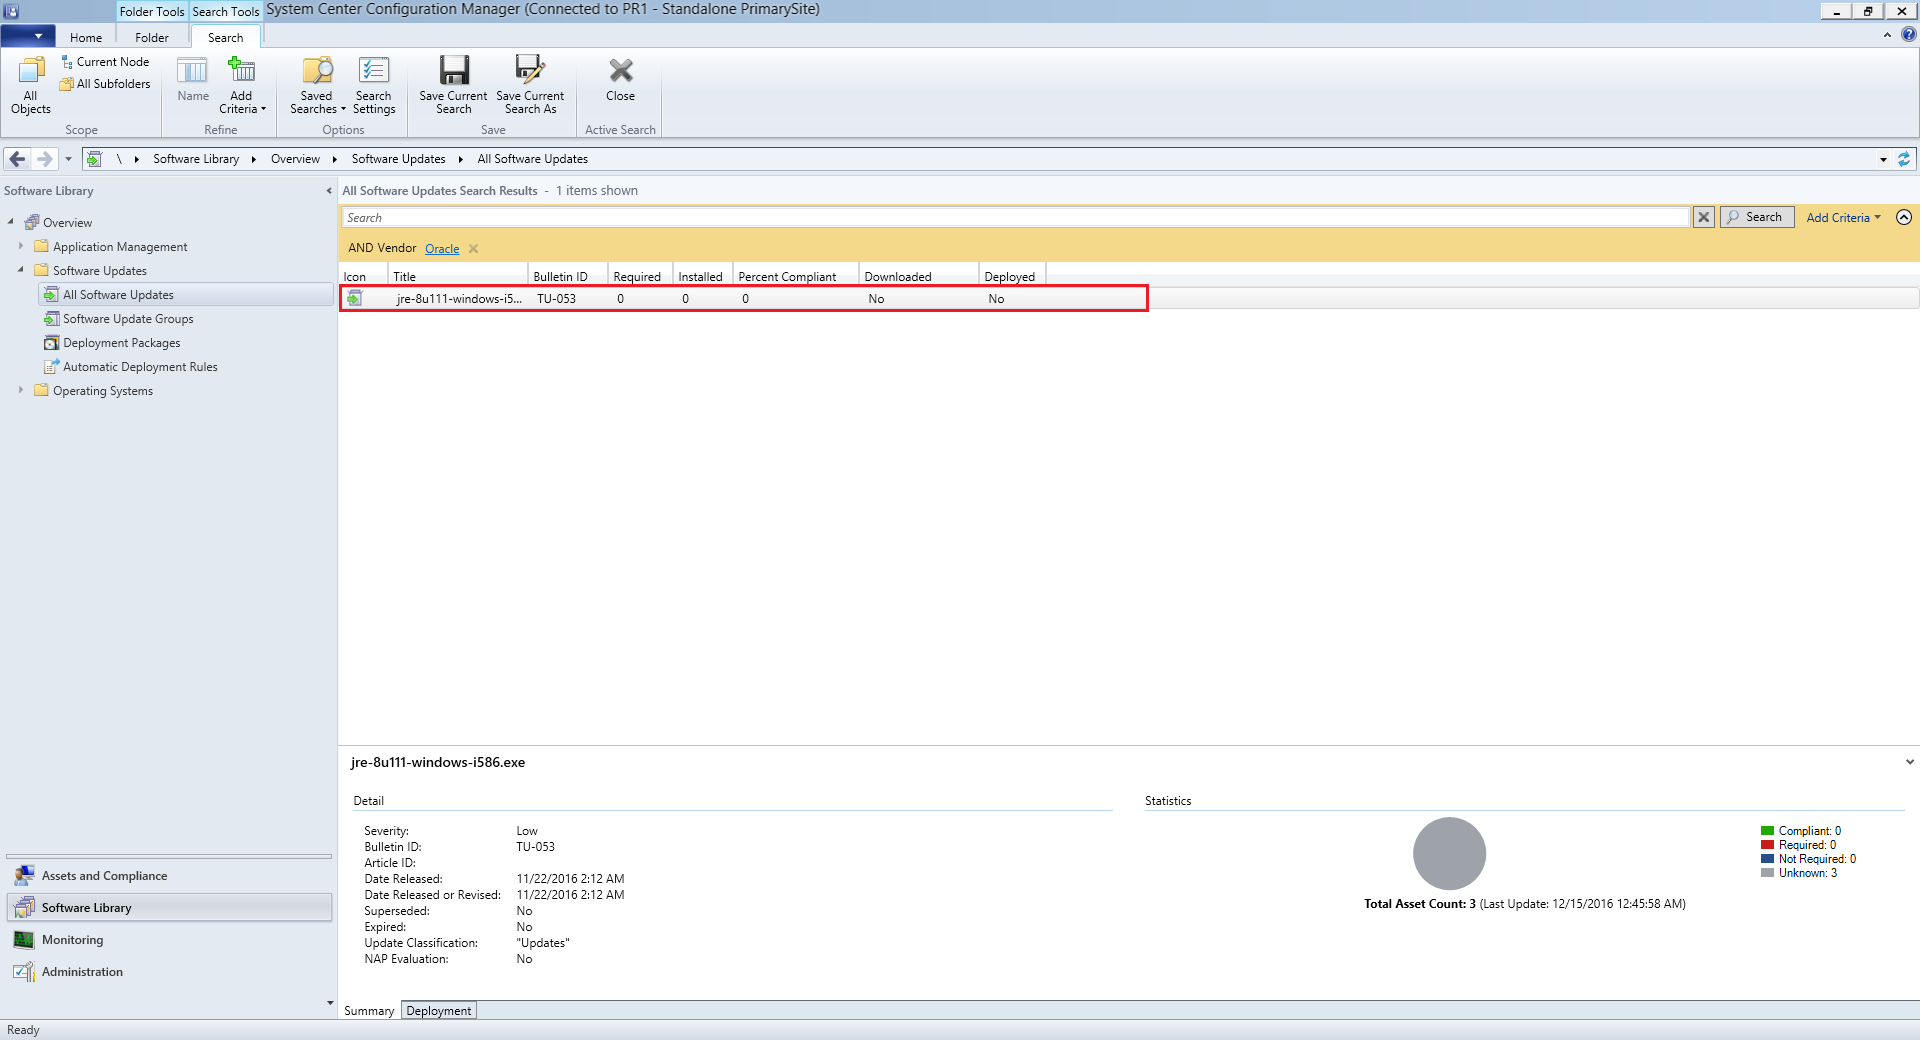 Update view for deploying the patches using ManageEngine SCCM deployment